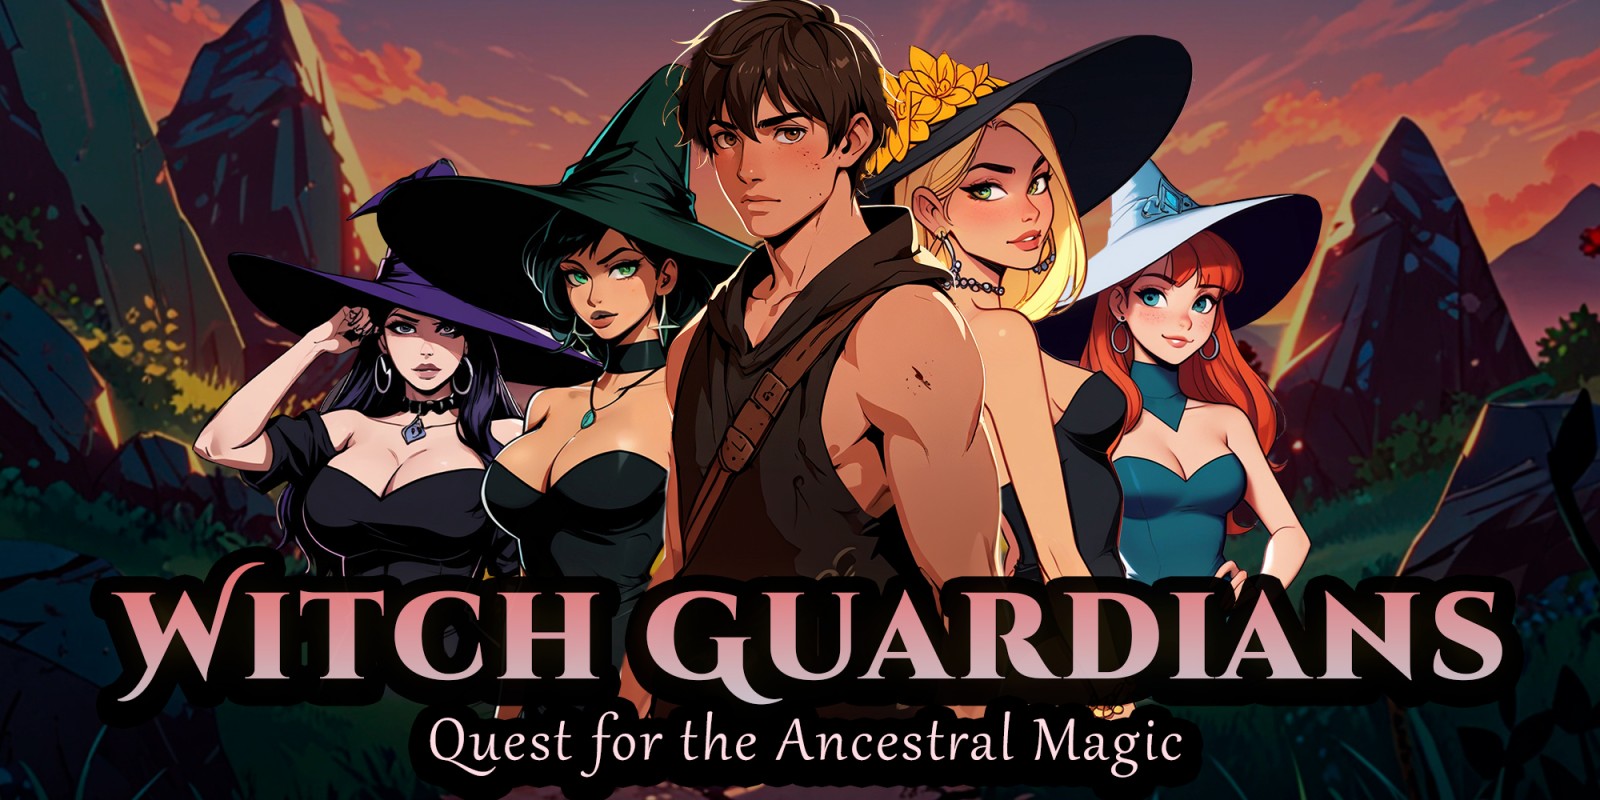 Witch Guardians: Quest for the Ancestral Magic